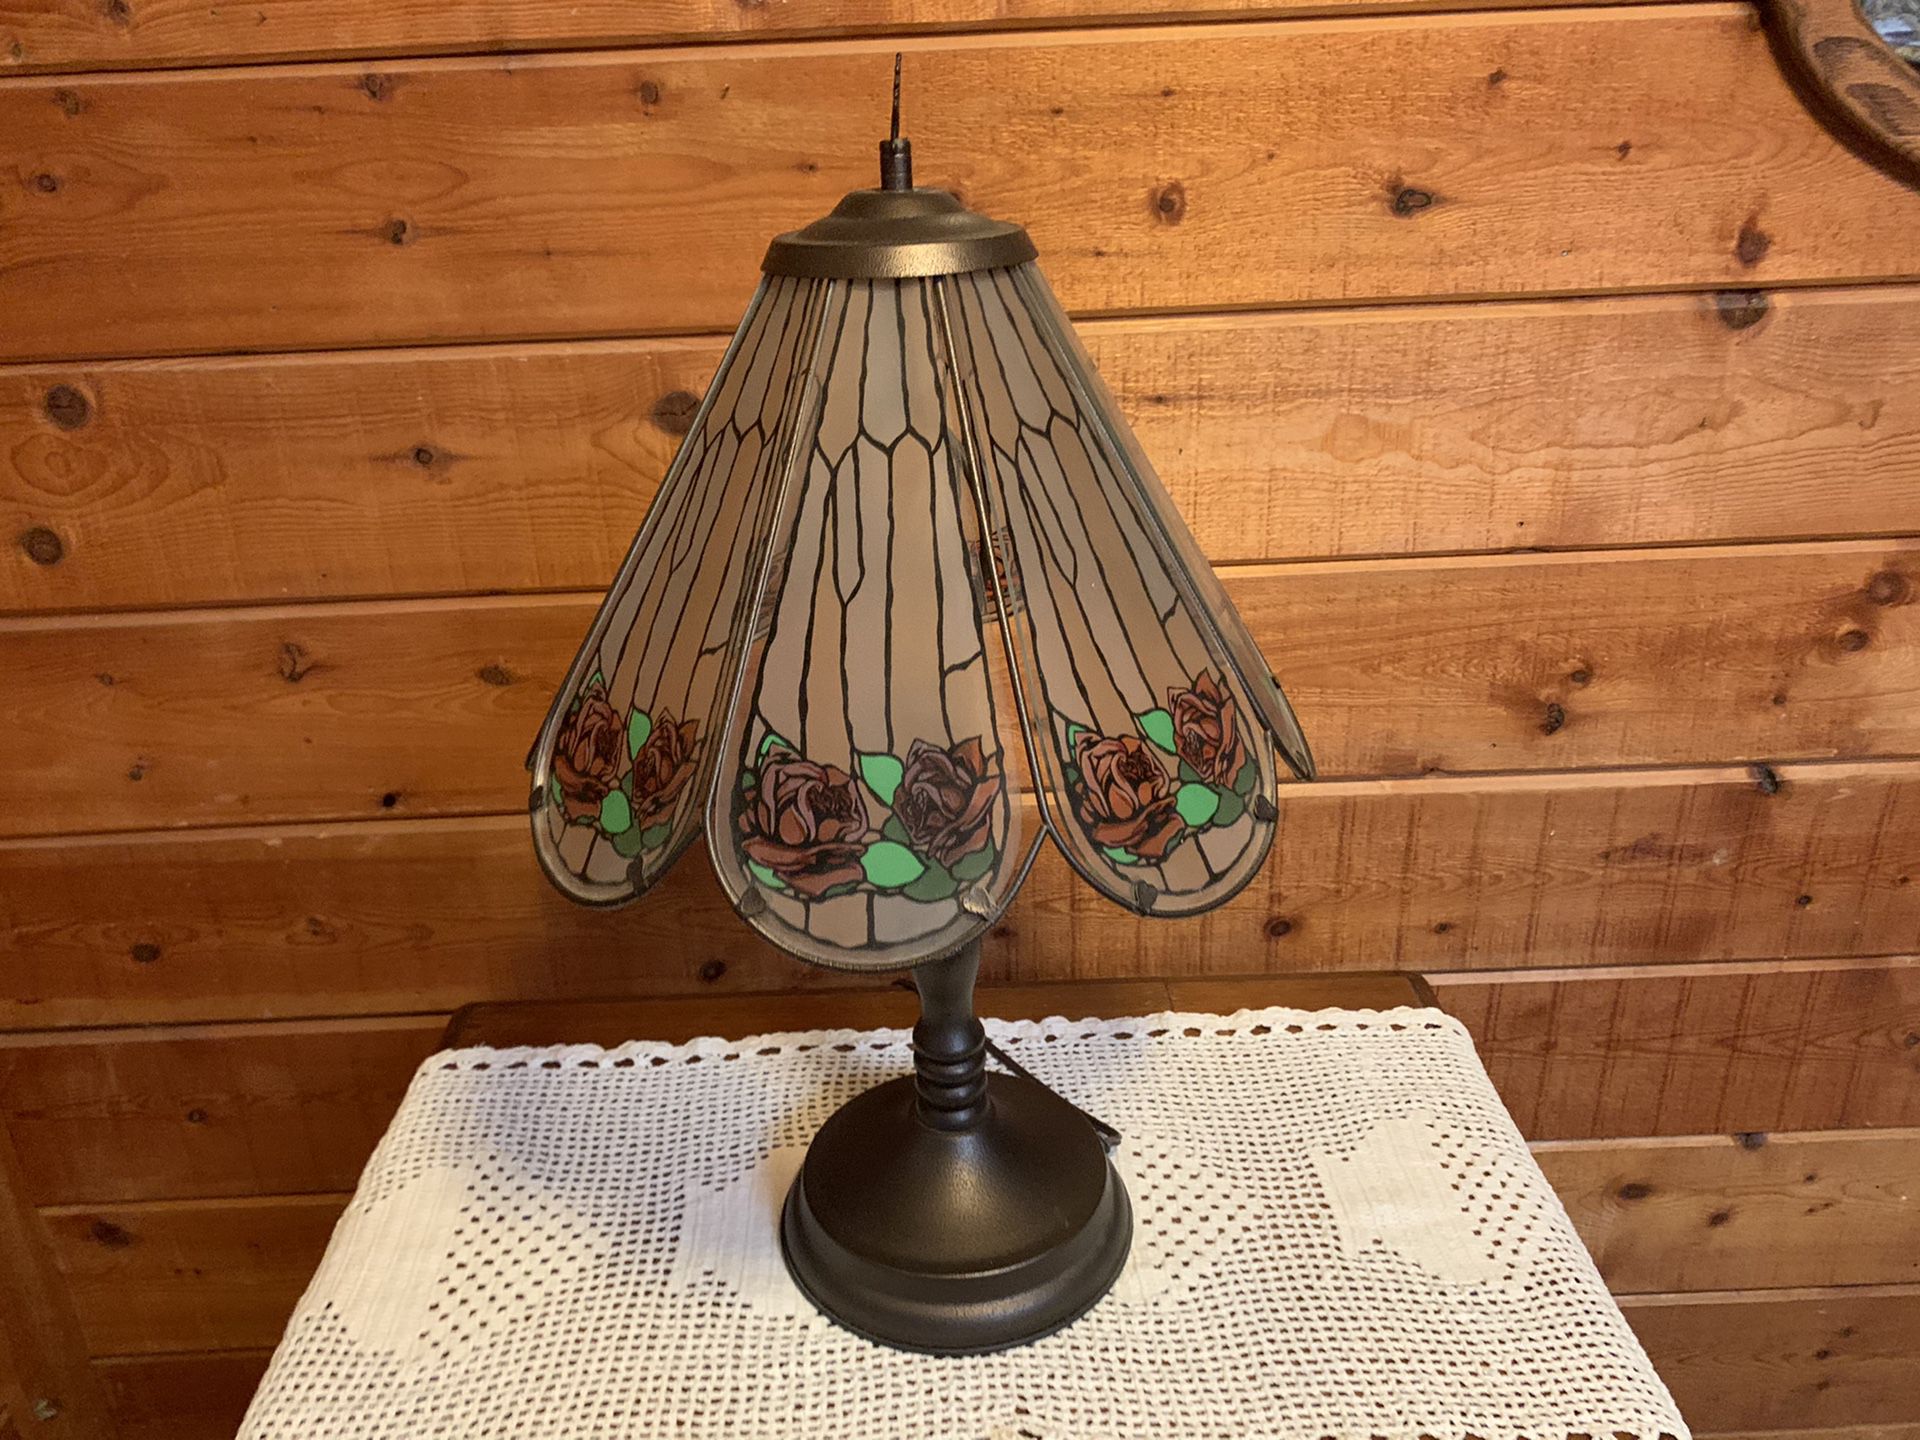 Vintage stain glass lamp